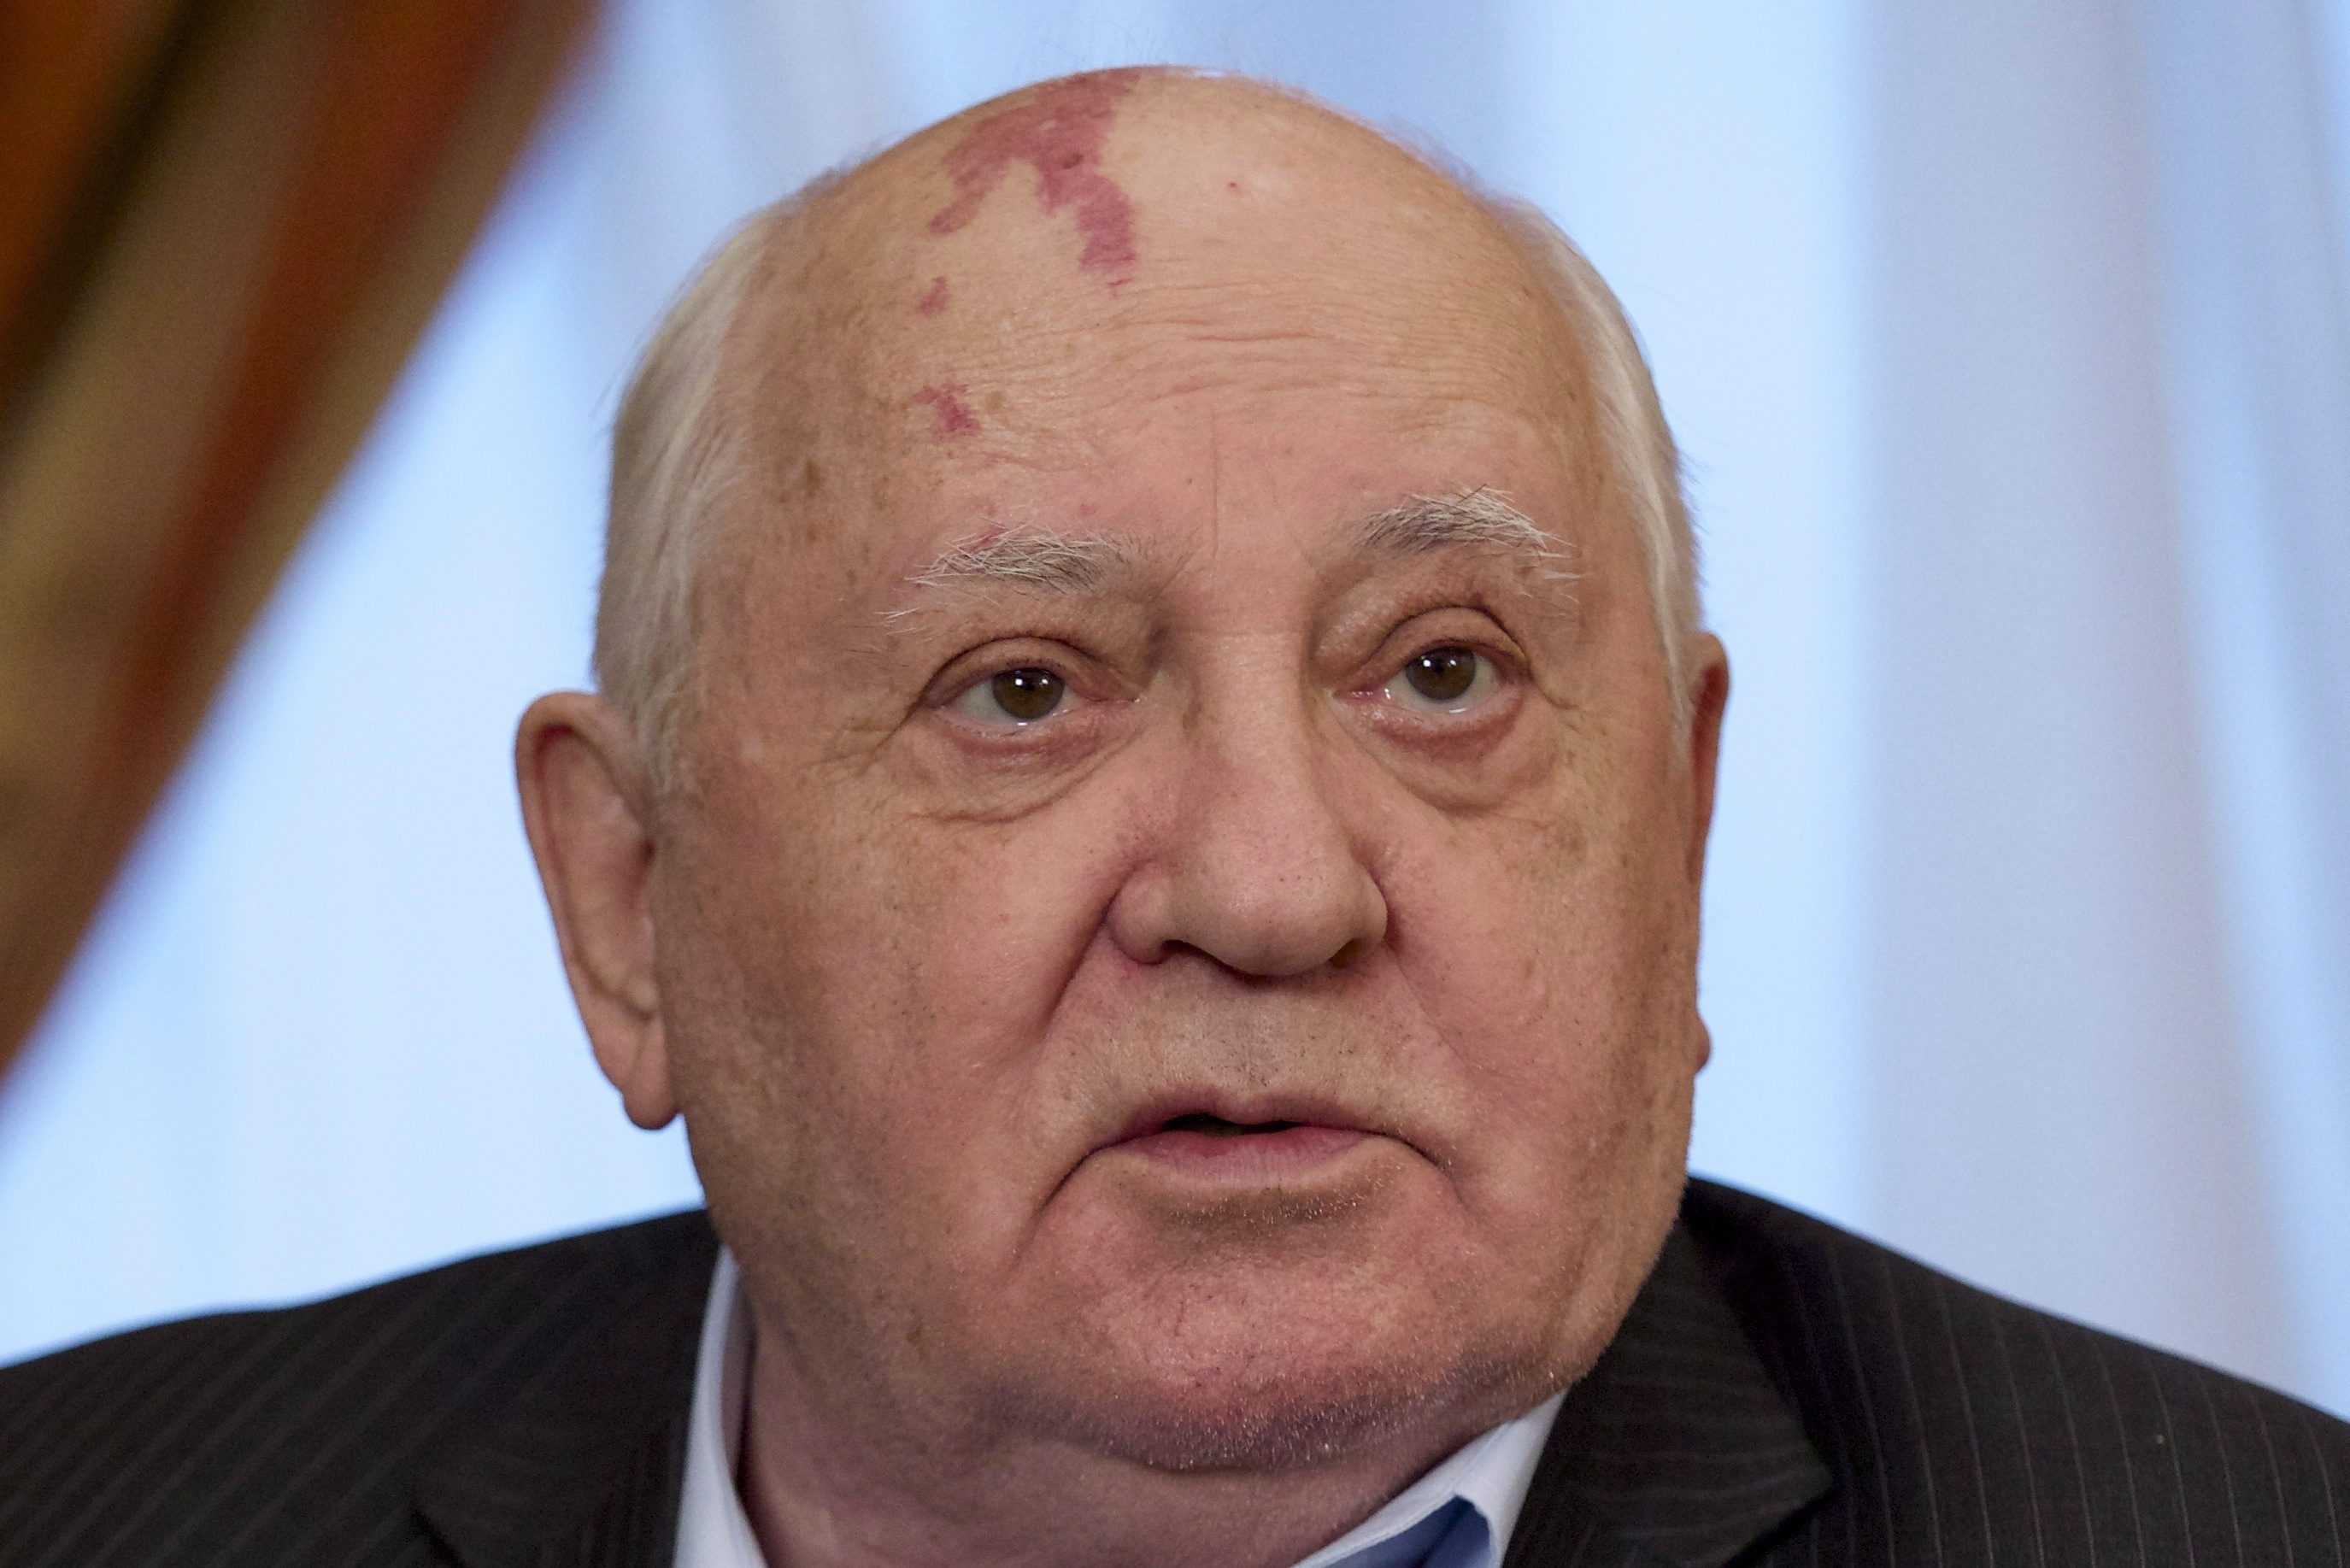 Mikhail Gorbachev, the last leader of the USSR, has died at 91